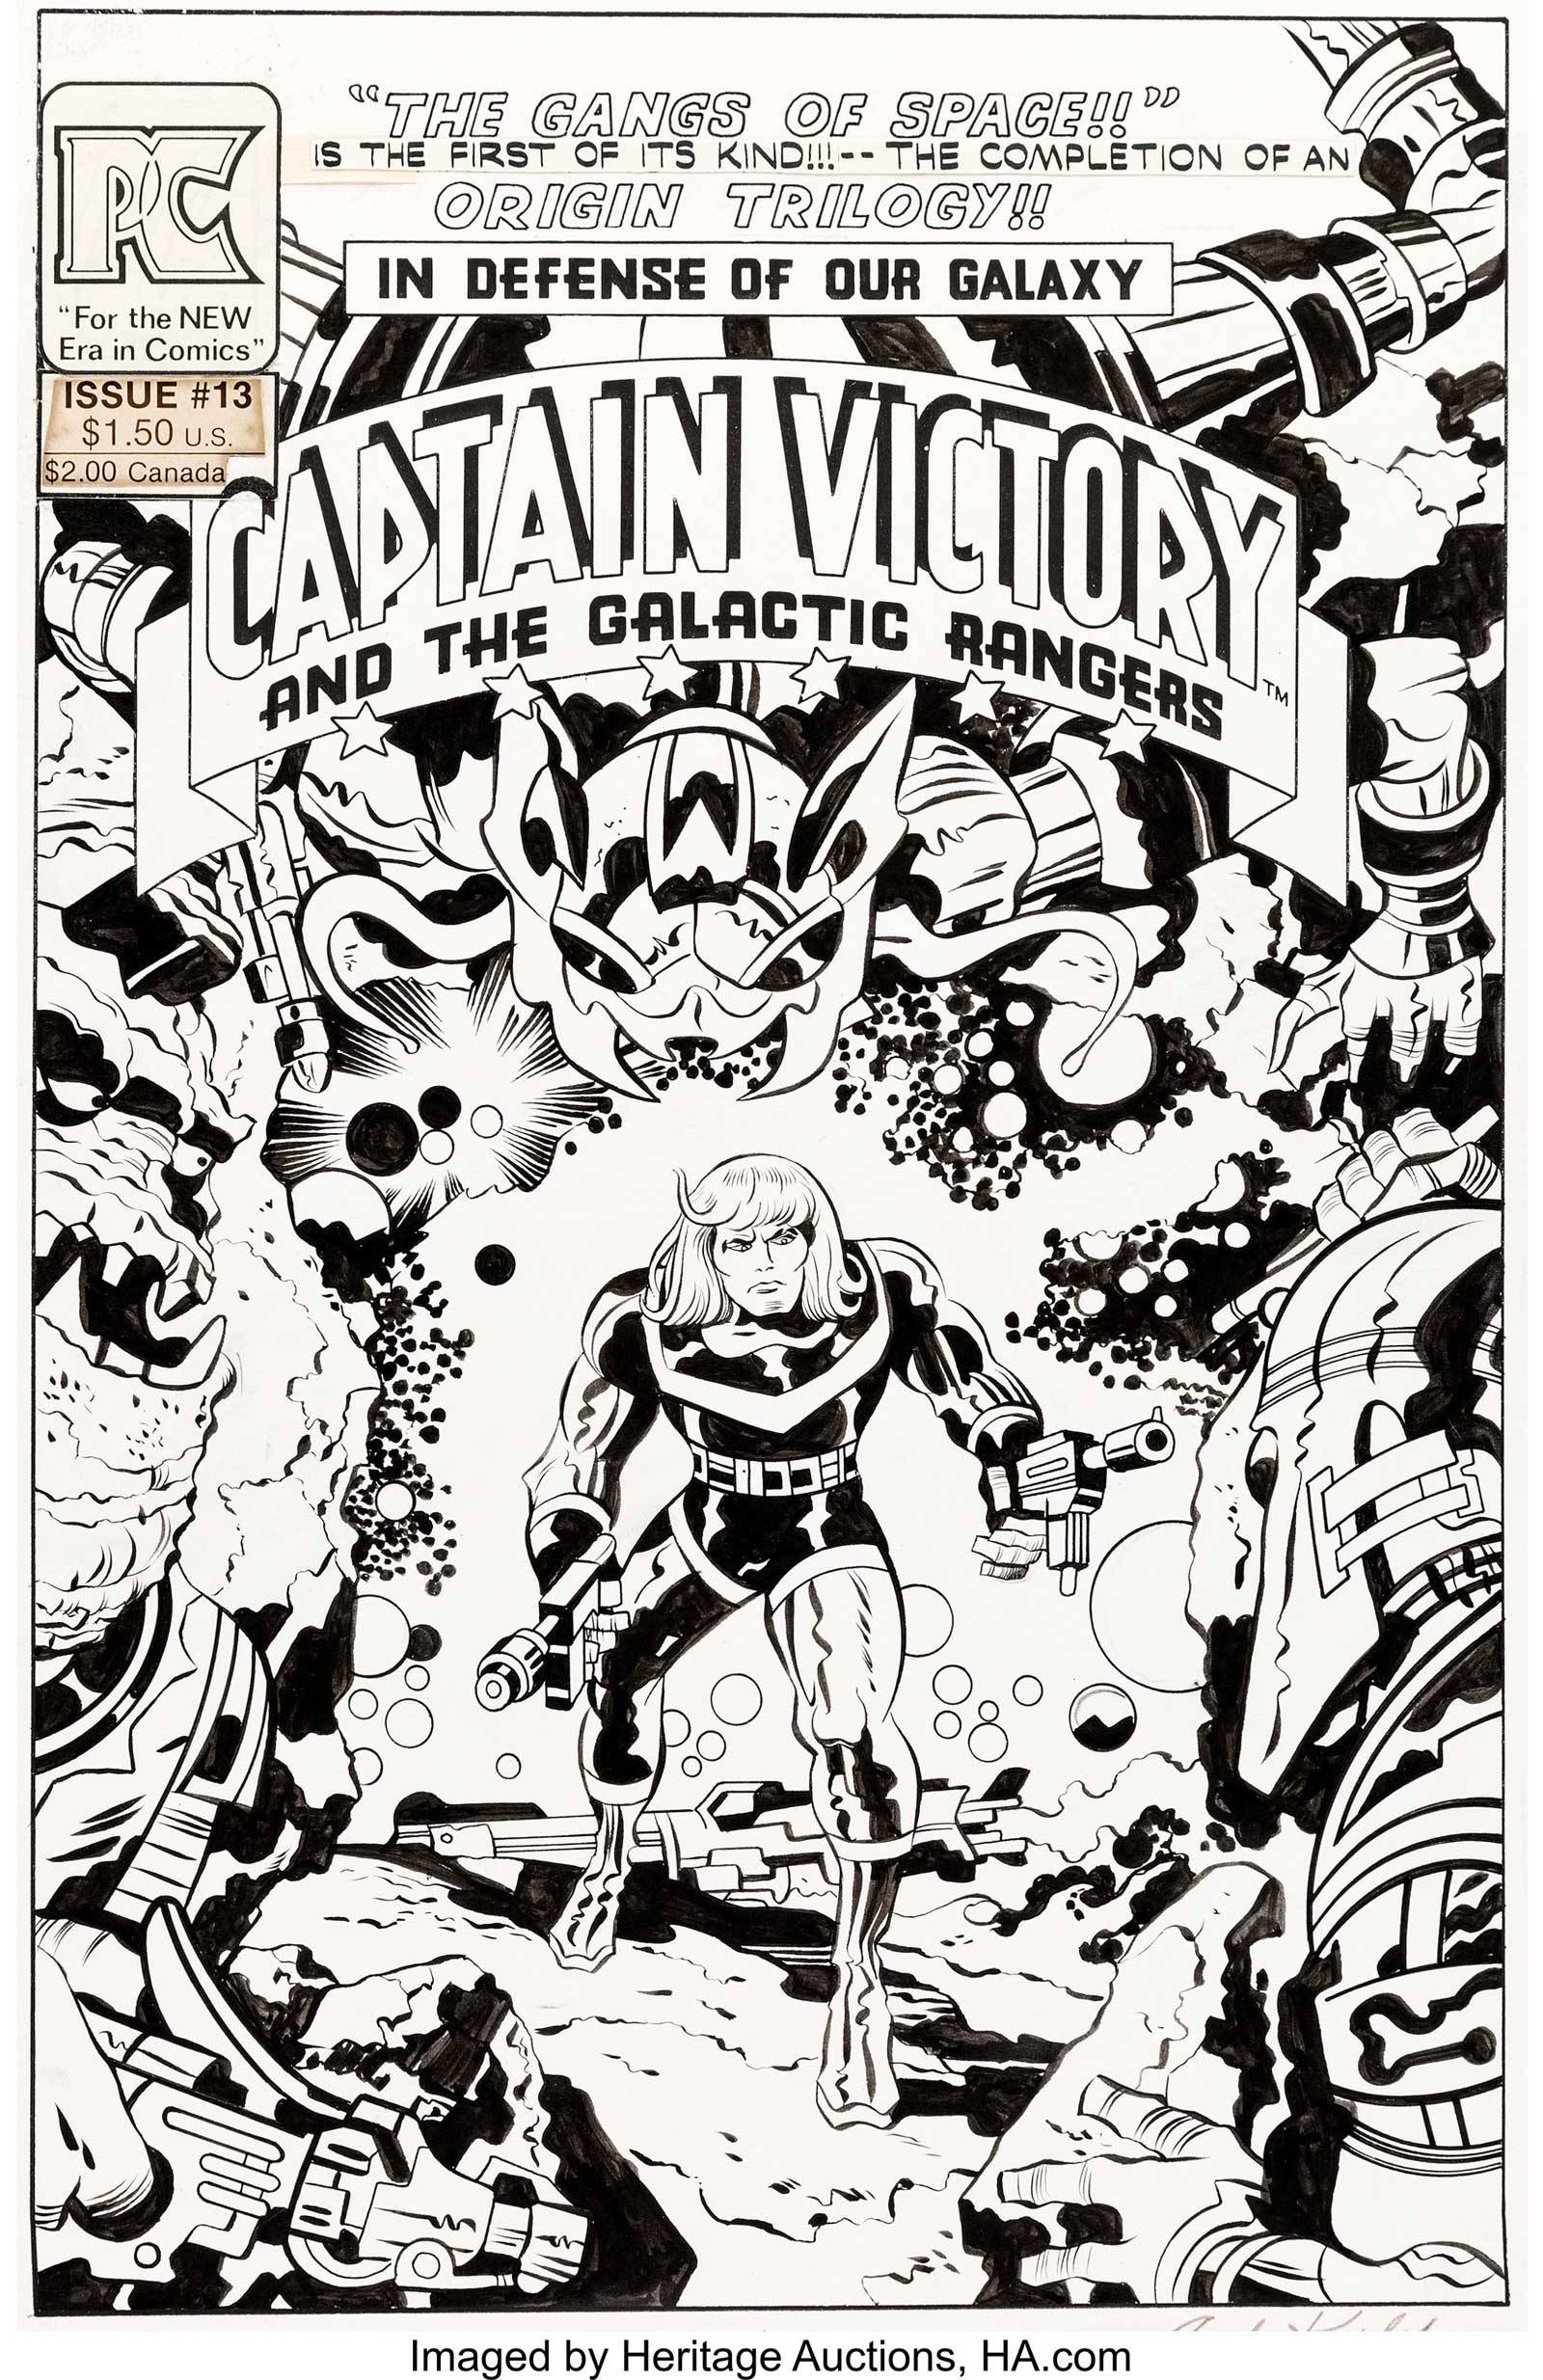 Captain Victory and the Galactic Rangers #13 - Jack Kirby